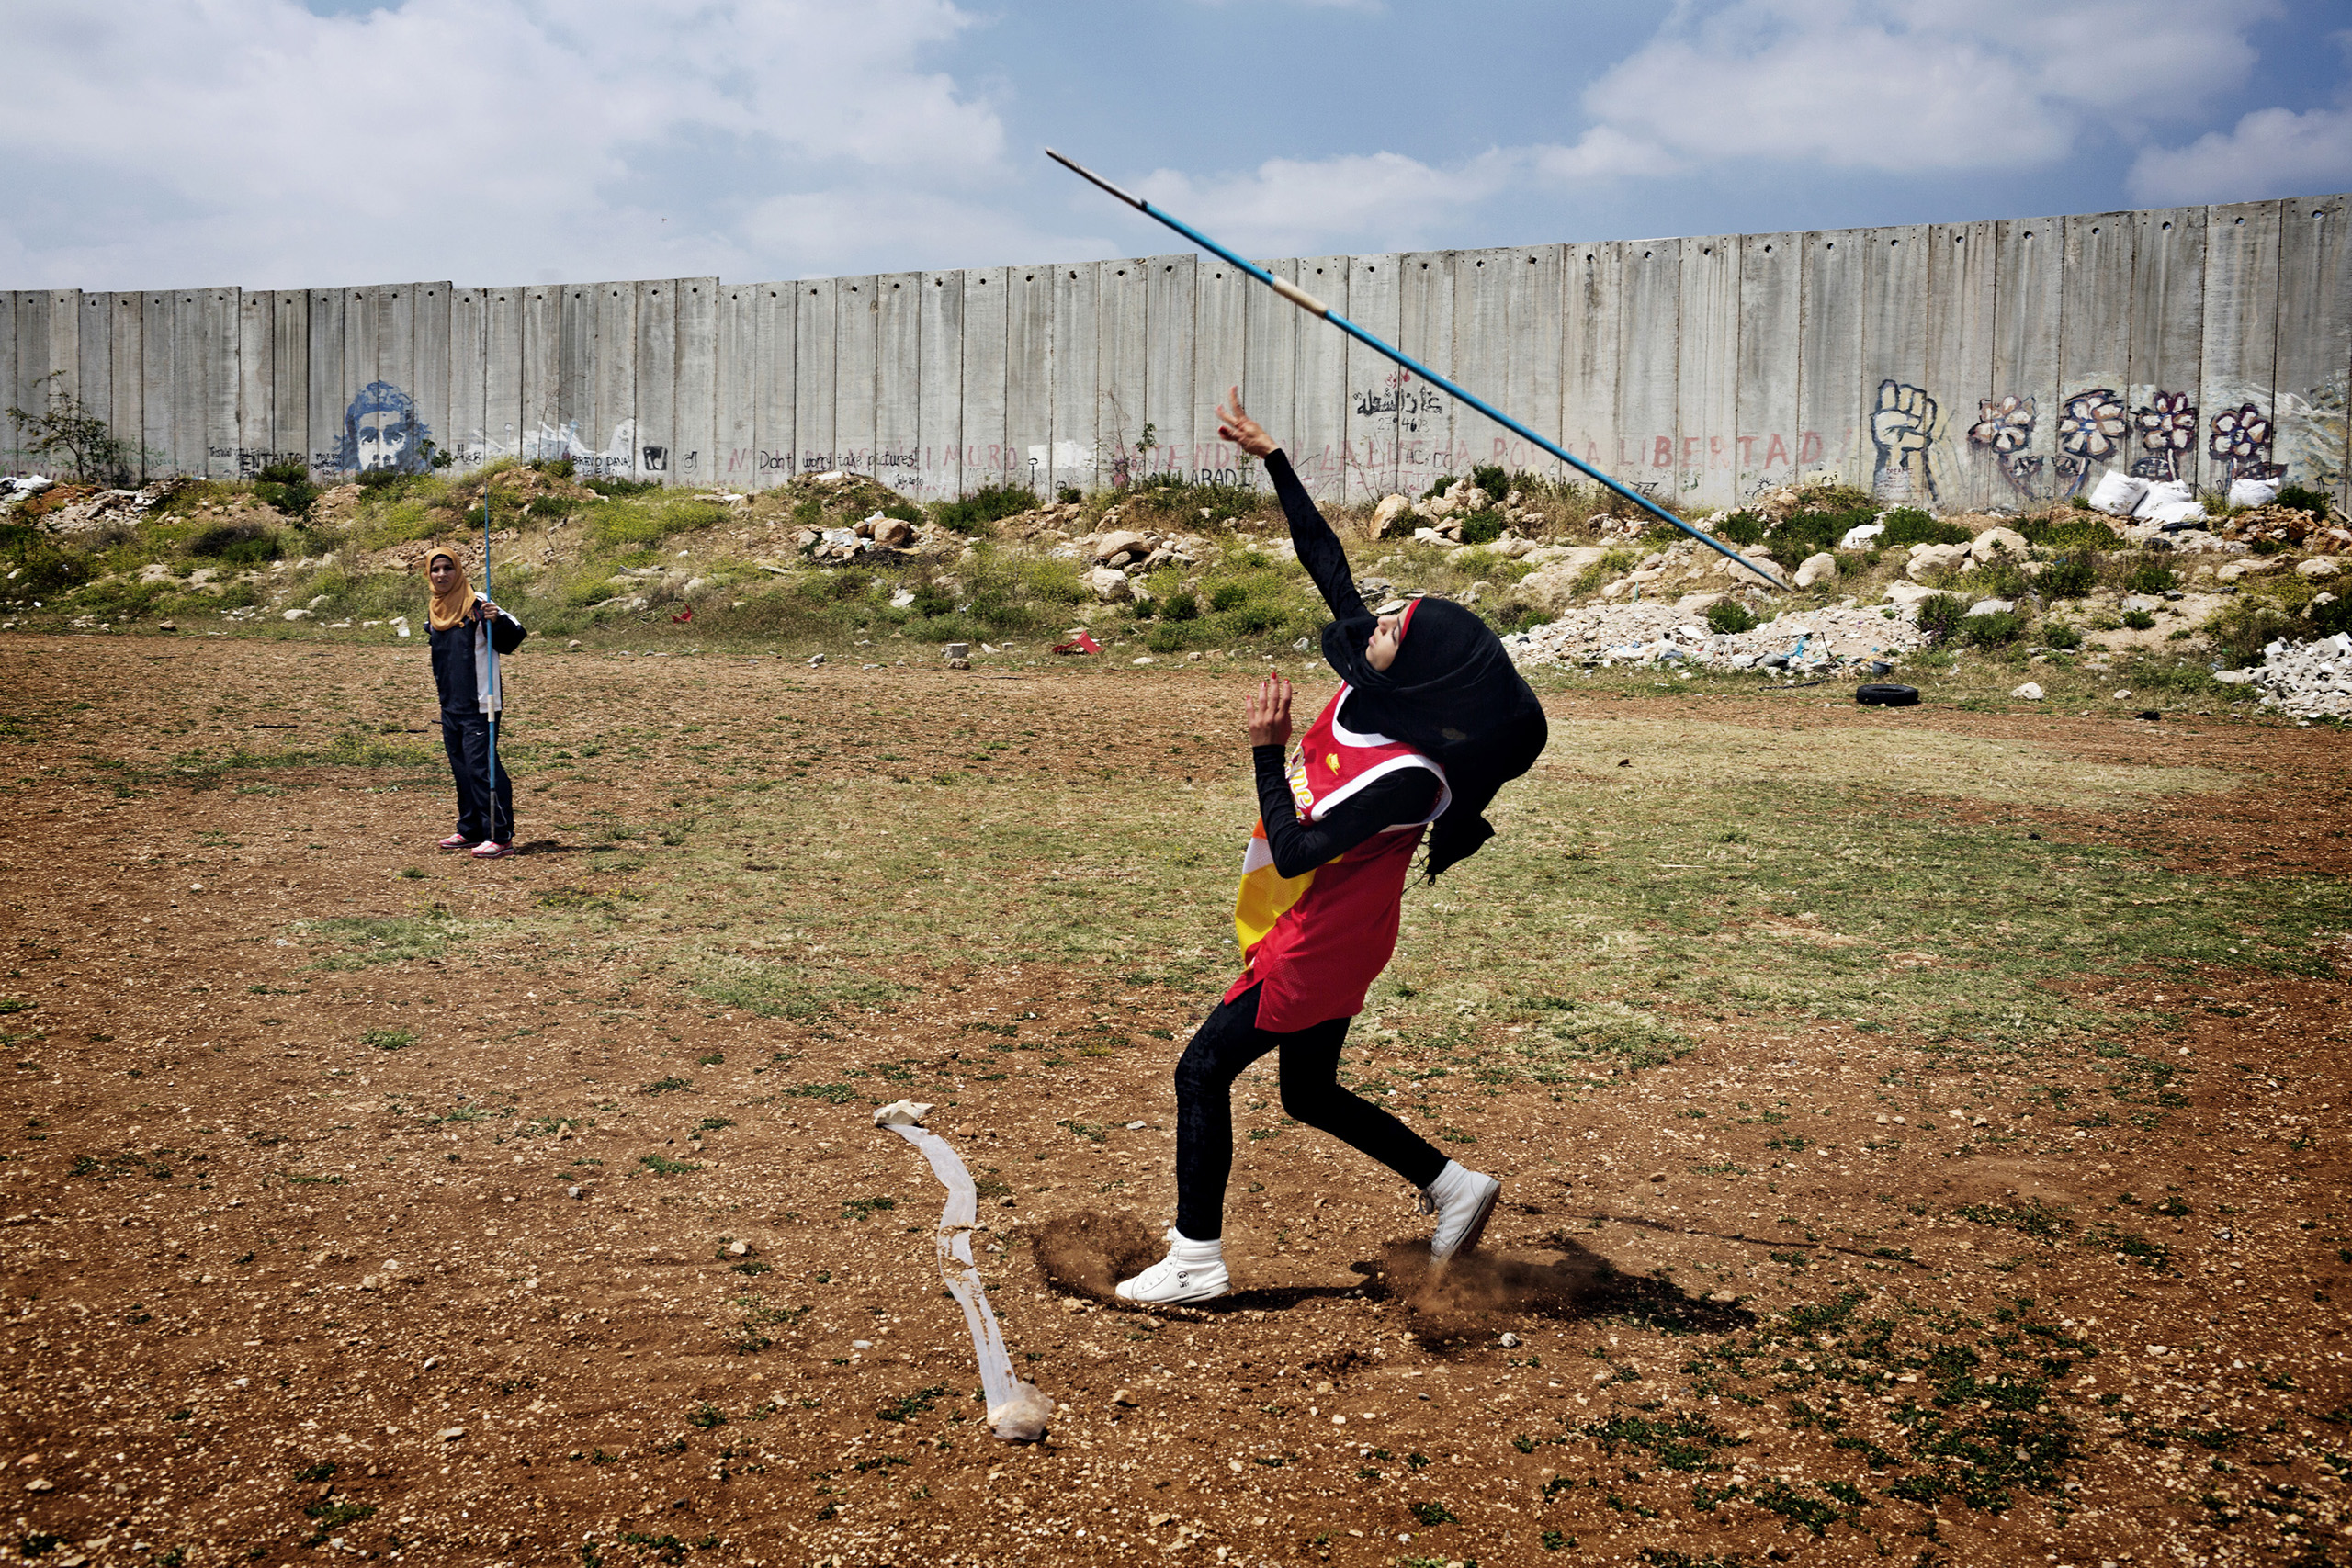 Students from the Al-Quds University javelin team wrap up the last practice before summer vacation in the West Bank city of Abu Dis, next to the Israeli Separation Wall.